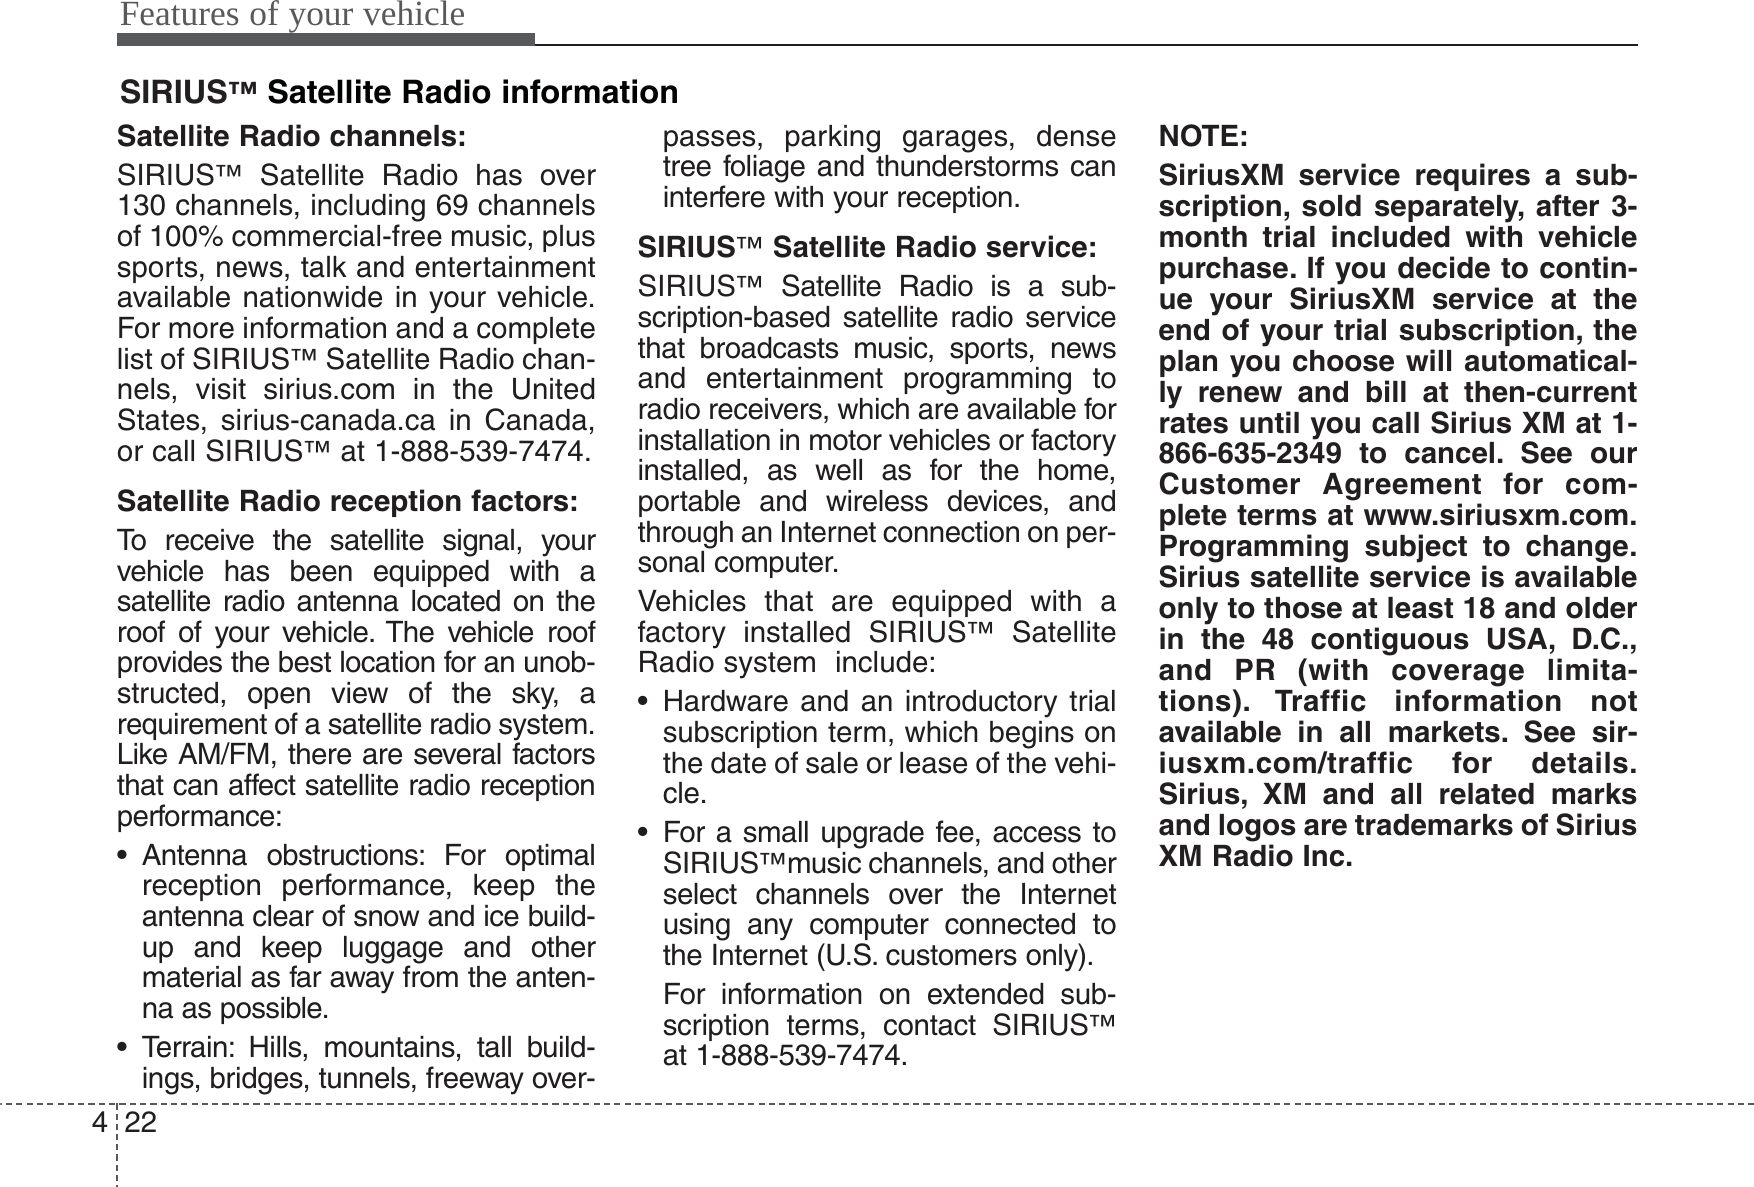 Features of your vehicle224Satellite Radio channels:SIRIUS™Satellite Radio has over130 channels, including 69 channelsof 100% commercial-free music, plussports, news, talk and entertainmentavailable nationwide in your vehicle.For more information and a completelist of SIRIUS™Satellite Radio chan-nels, visit sirius.com in the UnitedStates, sirius-canada.ca in Canada,or call SIRIUS™at 1-888-539-7474.Satellite Radio reception factors:To receive the satellite signal, yourvehicle has been equipped with asatellite radio antenna located on theroof of your vehicle. The vehicle roofprovides the best location for an unob-structed, open view of the sky, arequirement of a satellite radio system.Like AM/FM, there are several factorsthat can affect satellite radio receptionperformance:• Antenna obstructions: For optimalreception performance, keep theantenna clear of snow and ice build-up and keep luggage and othermaterial as far away from the anten-na as possible.• Terrain: Hills, mountains, tall build-ings, bridges, tunnels, freeway over-passes, parking garages, densetree foliage and thunderstorms caninterfere with your reception.SIRIUS™Satellite Radio service:SIRIUS™Satellite Radio is a sub-scription-based satellite radio servicethat broadcasts music, sports, newsand entertainment programming toradio receivers, which are available forinstallation in motor vehicles or factoryinstalled, as well as for the home,portable and wireless devices, andthrough an Internet connection on per-sonal computer.Vehicles that are equipped with afactory installed SIRIUS™SatelliteRadio system  include:• Hardware and an introductory trialsubscription term, which begins onthe date of sale or lease of the vehi-cle.• For a small upgrade fee, access toSIRIUS™music channels, and otherselect channels over the Internetusing any computer connected tothe Internet (U.S. customers only).For information on extended sub-scription terms, contact SIRIUS™at 1-888-539-7474.NOTE:SiriusXM service requires a sub-scription, sold separately, after 3-month trial included with vehiclepurchase. If you decide to contin-ue your SiriusXM service at theend of your trial subscription, theplan you choose will automatical-ly renew and bill at then-currentrates until you call Sirius XM at 1-866-635-2349 to cancel. See ourCustomer Agreement for com-plete terms at www.siriusxm.com.Programming subject to change.Sirius satellite service is availableonly to those at least 18 and olderin the 48 contiguous USA, D.C.,and PR (with coverage limita-tions). Traffic information notavailable in all markets. See sir-iusxm.com/traffic for details.Sirius, XM and all related marksand logos are trademarks of SiriusXM Radio Inc.SIRIUS™Satellite Radio information 